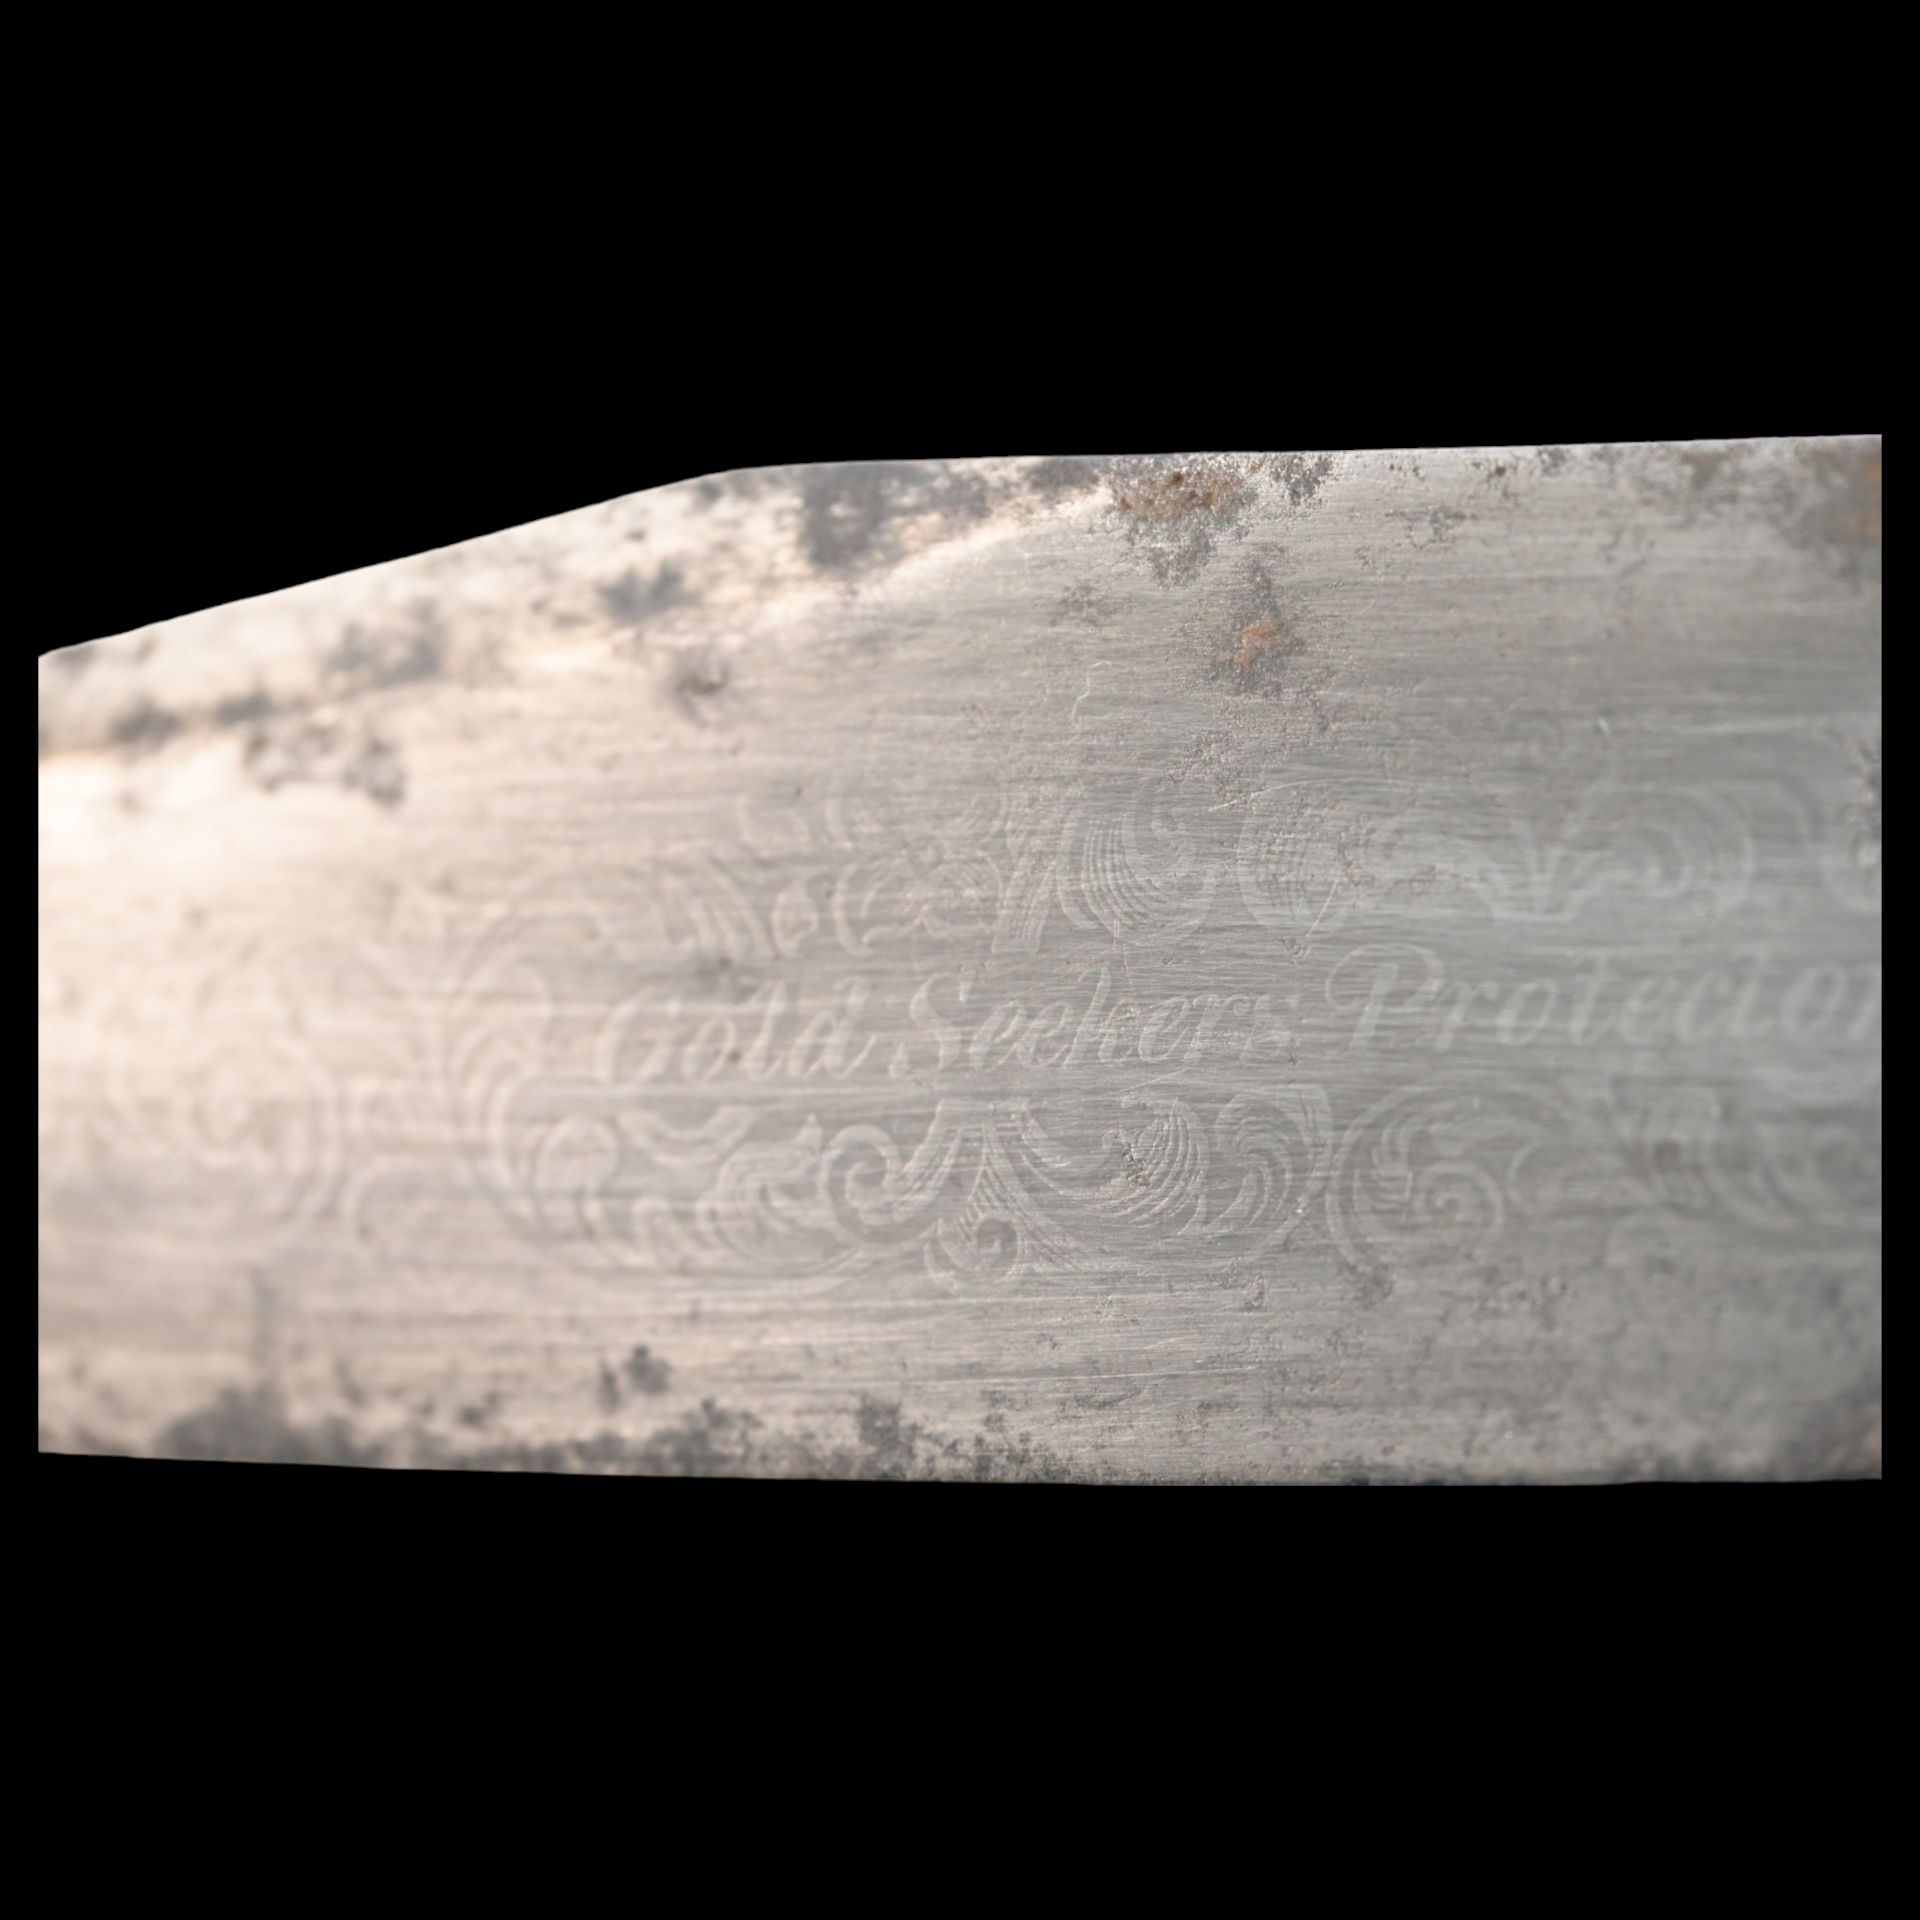 Extra rare and very early Bowie knife of American Gold Miners "Gold Seekers Protector", 1820-30s. - Image 4 of 10